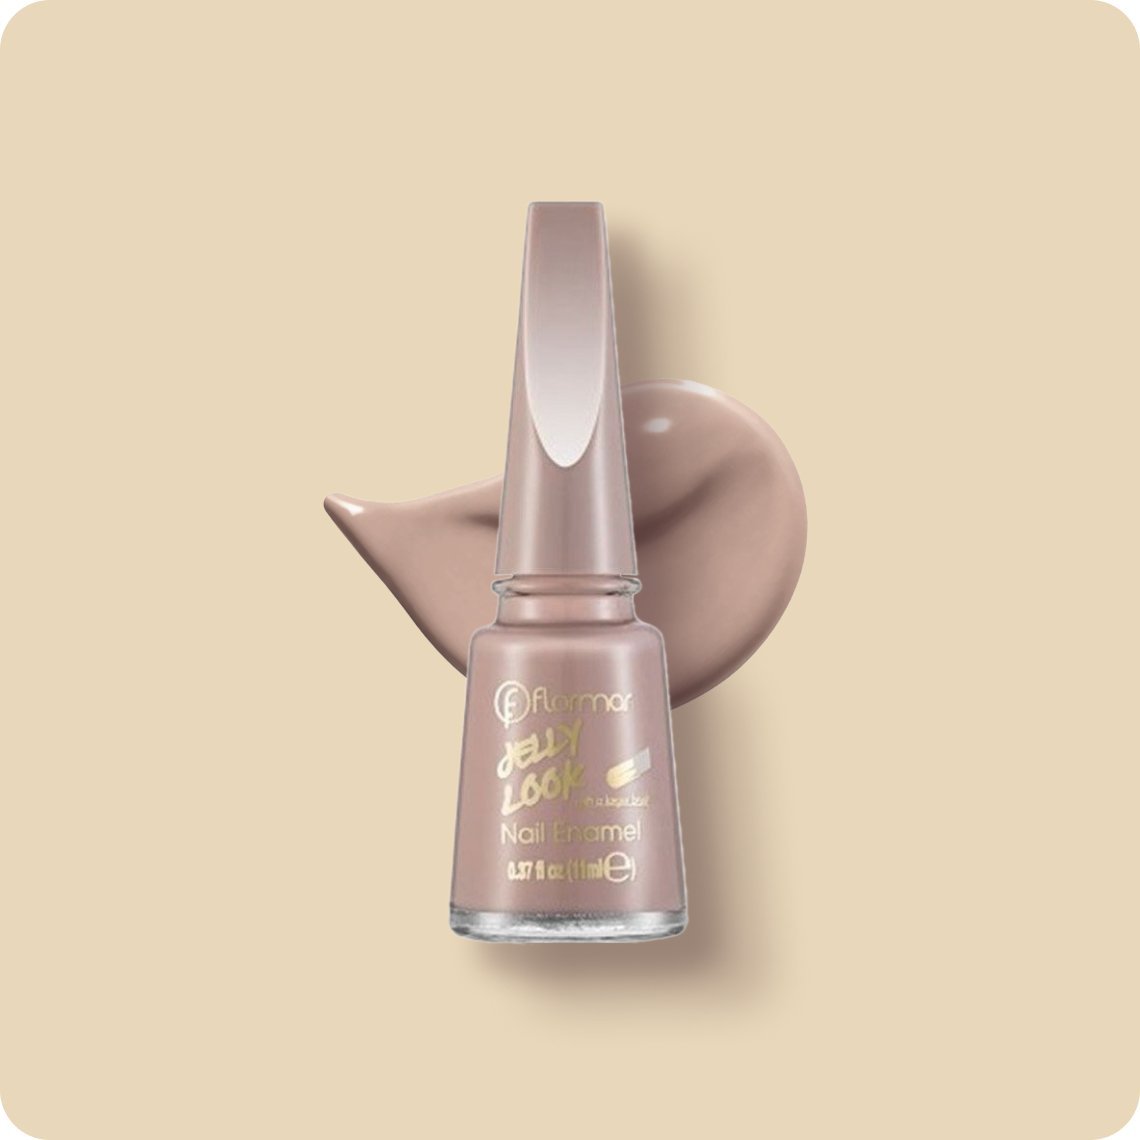 Flormar Perfect Coverage Fondation 113, Medium Beige: Buy Online at Best  Price in Egypt - Souq is now